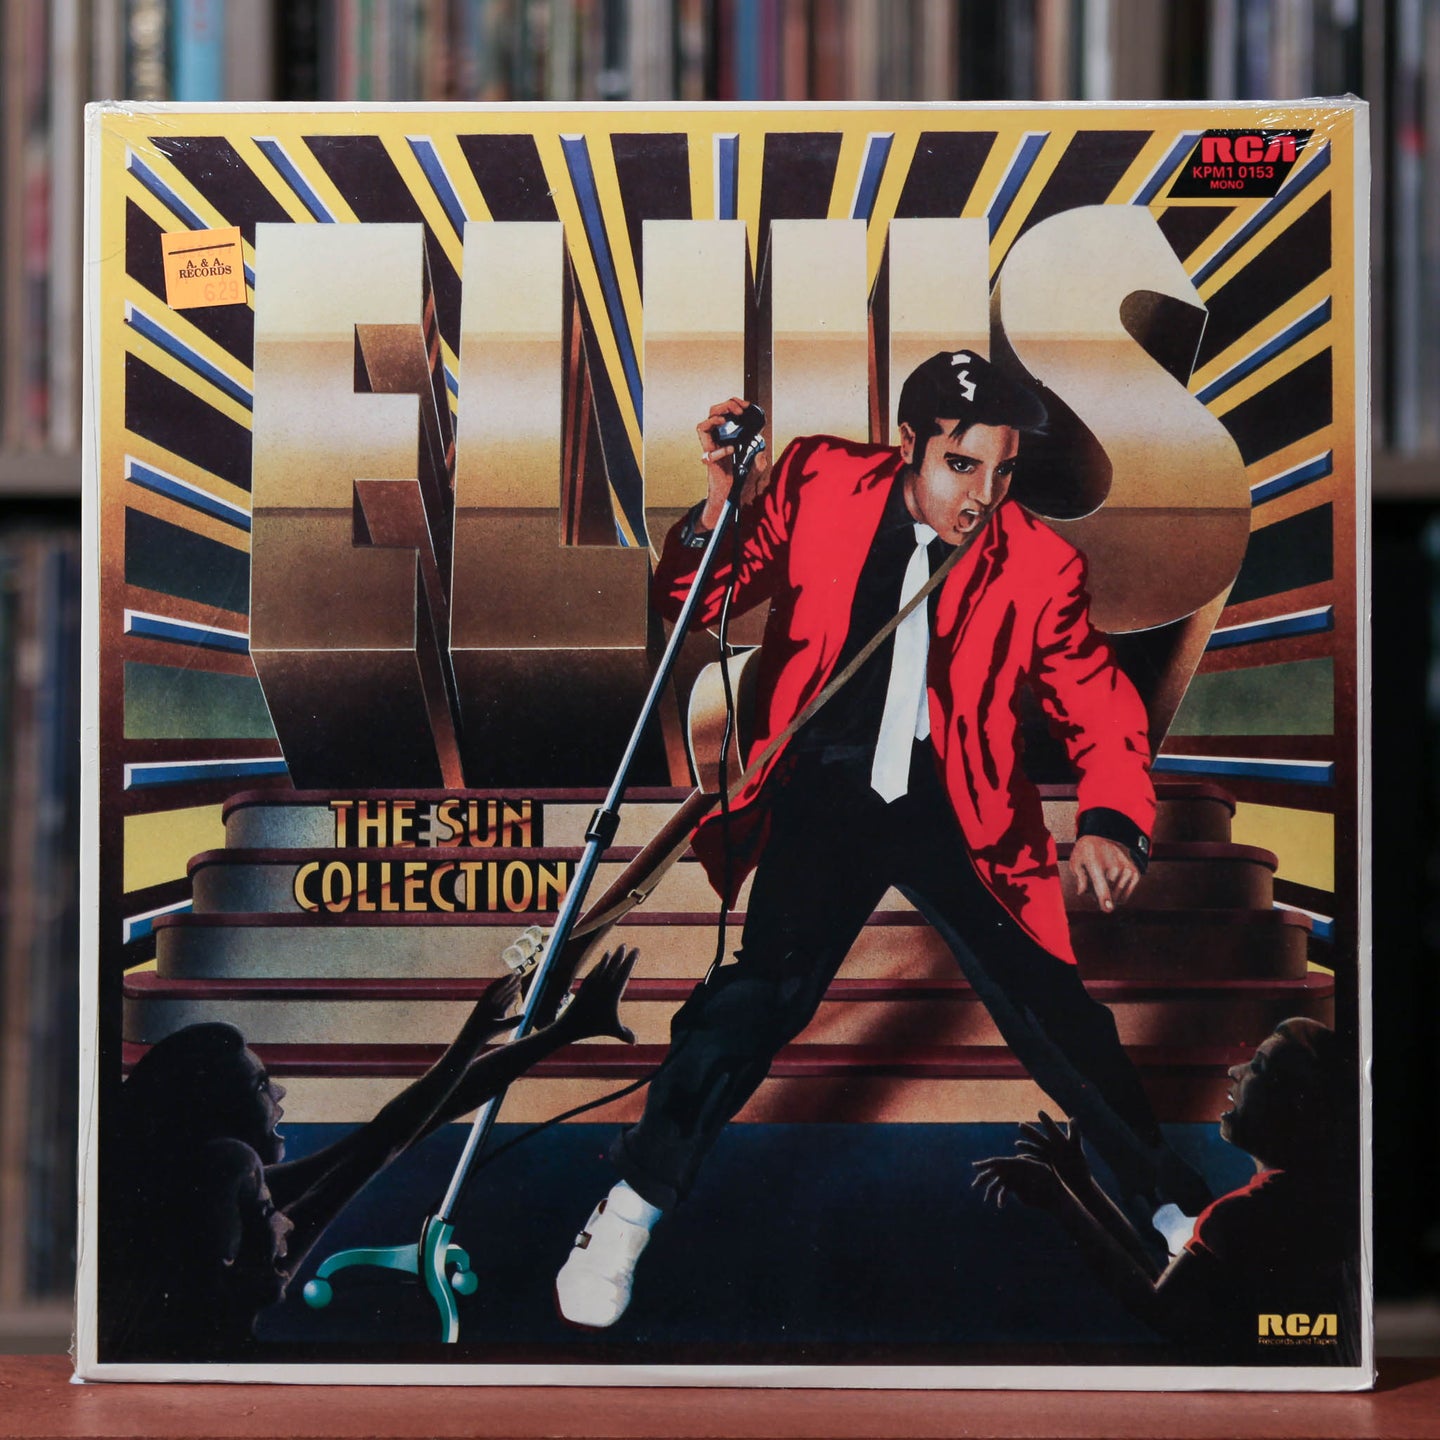 Elvis Presley - The Sun Collection - Mono - Canada Import - 1975 RCA, SEALED